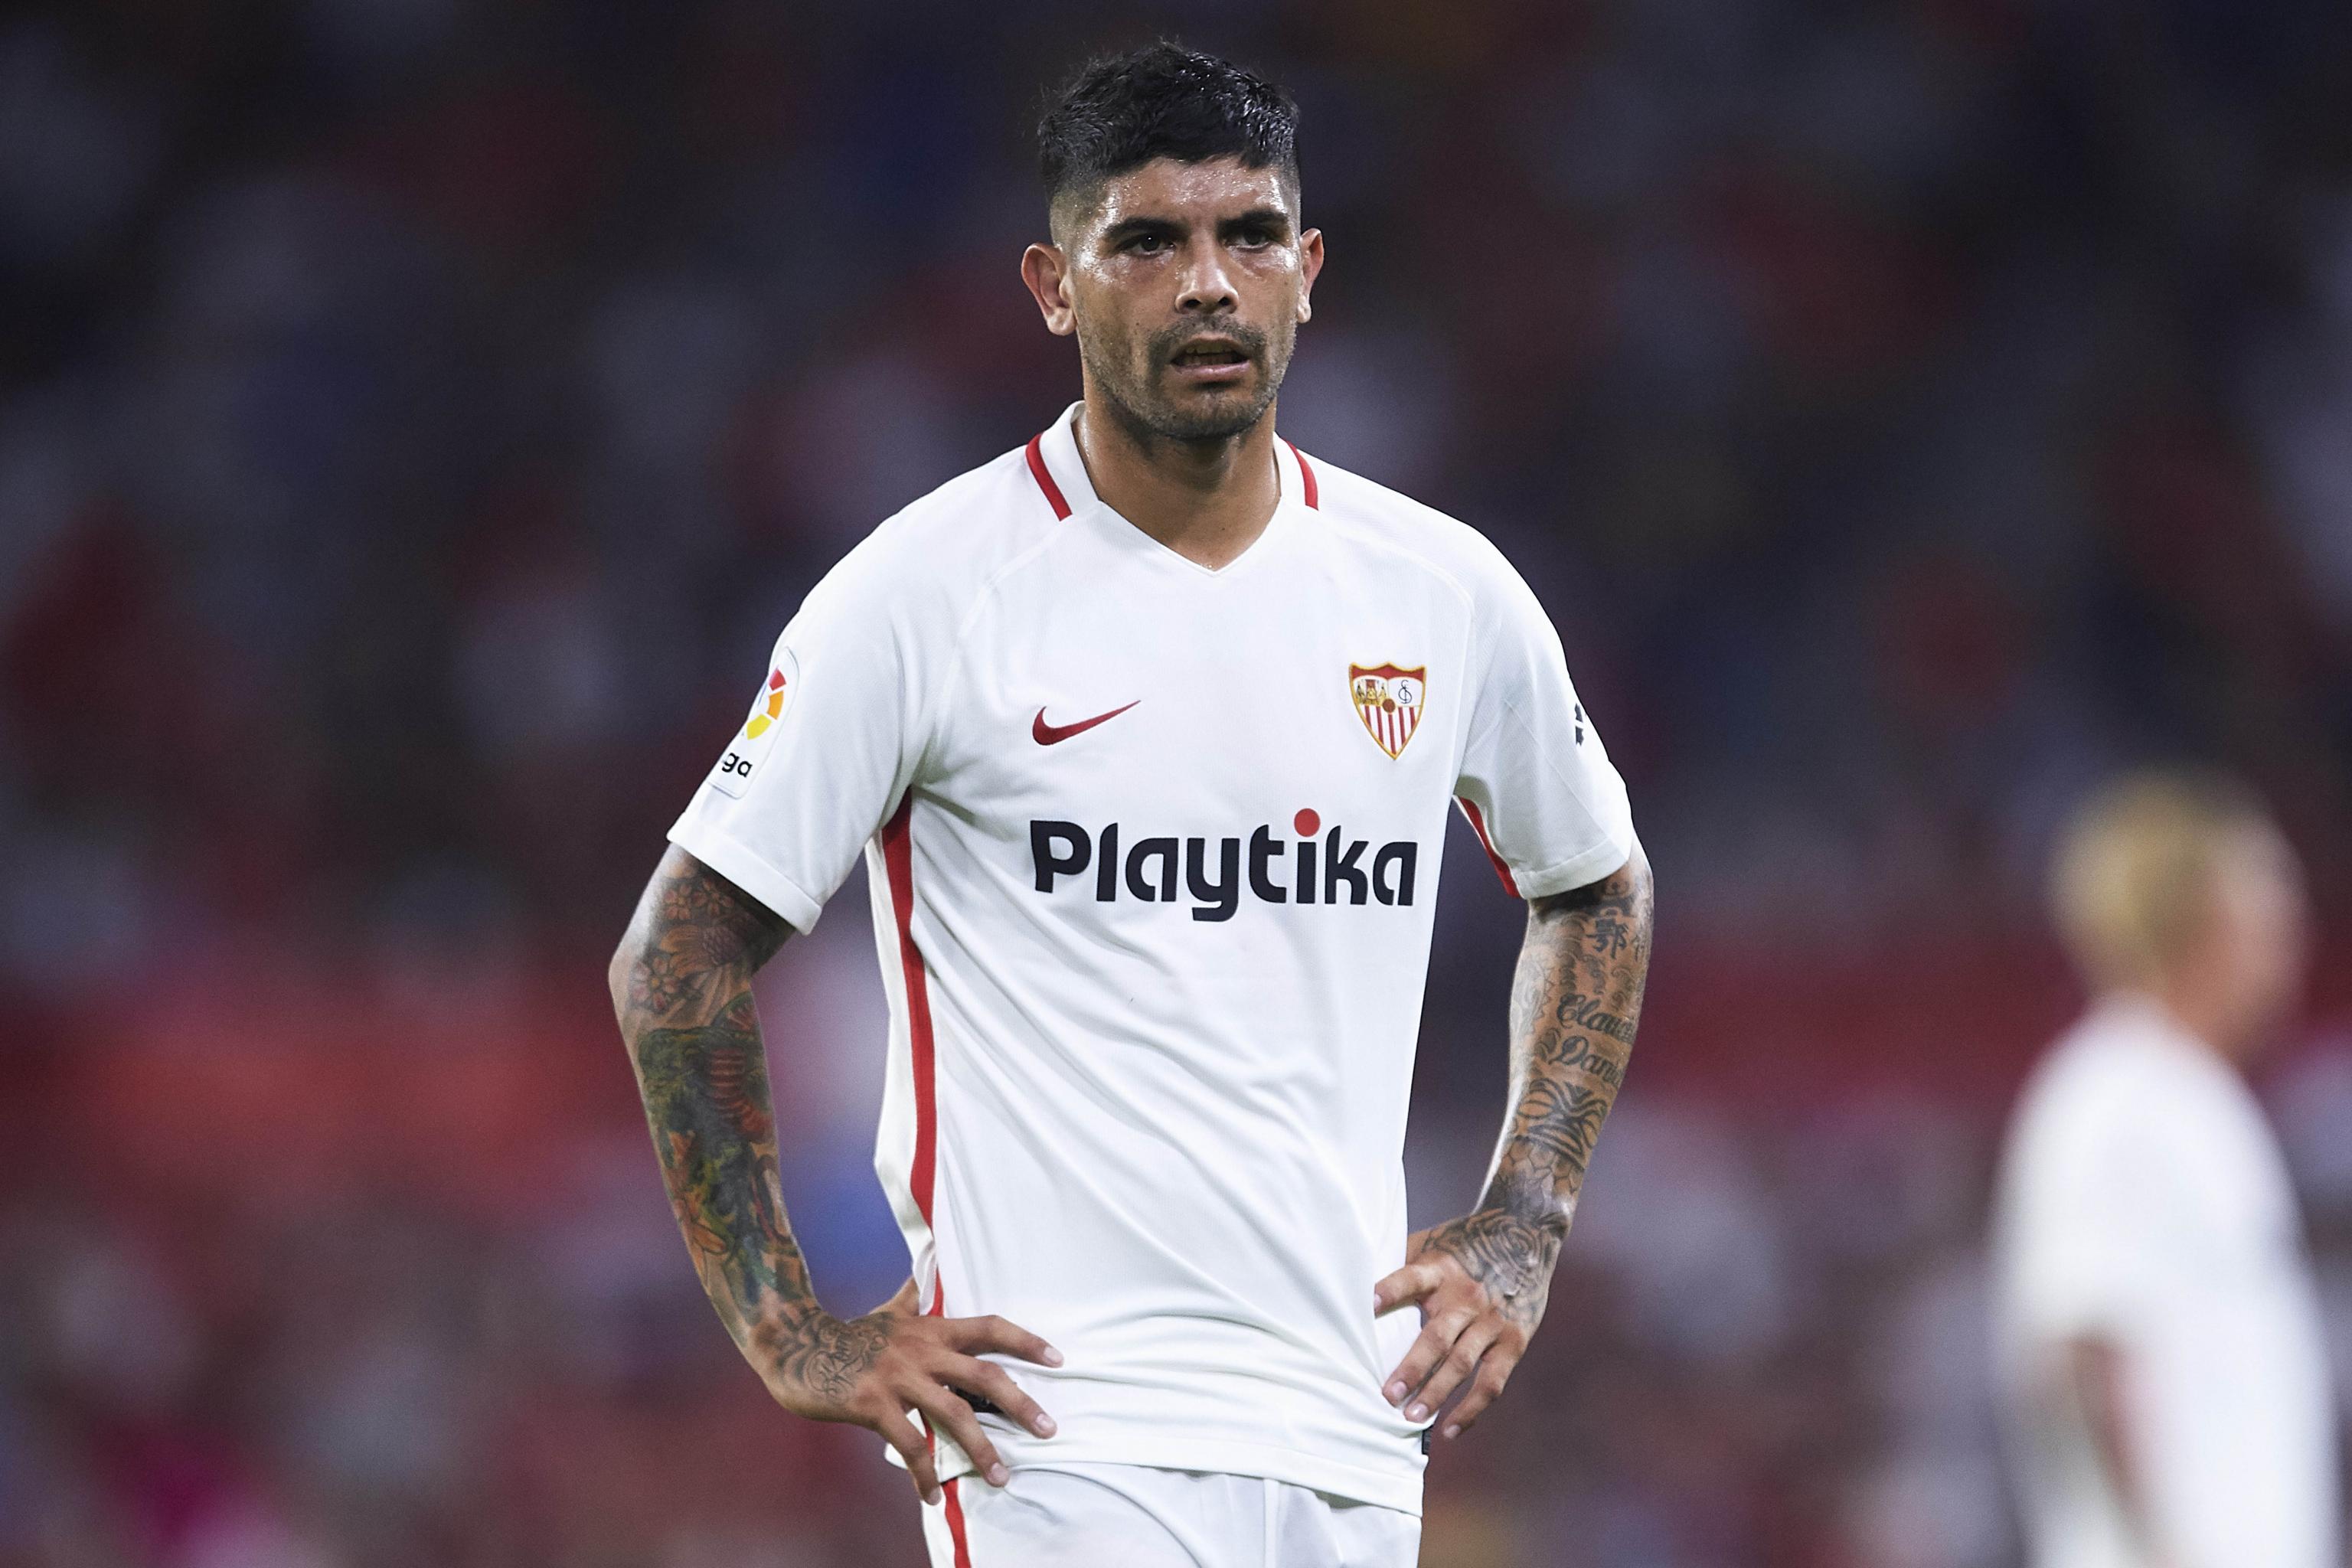 Report: Arsenal Make Ever Banega Their 'First Priority' After Ivan Gazidis Exit | Bleacher Report | Latest News, Videos and Highlights